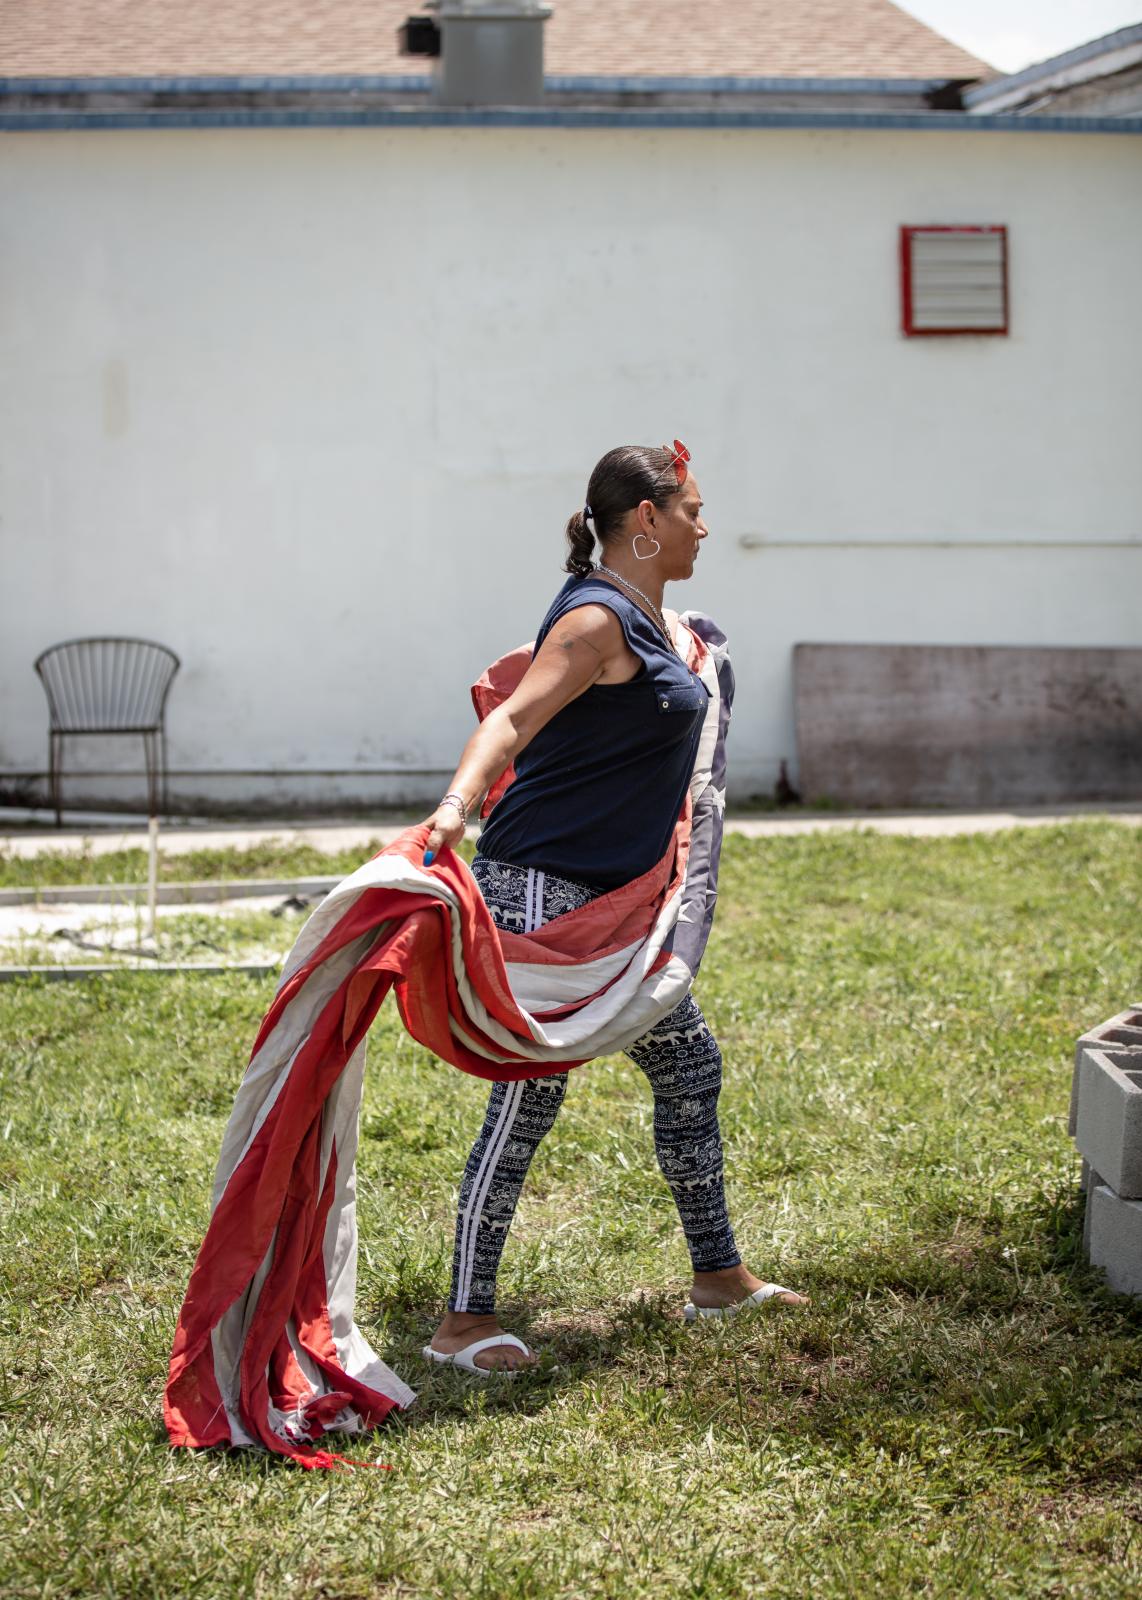 Post 67 - Elaine Salazar, a Post bartender, carries an oversized flag to the fire during the flag...